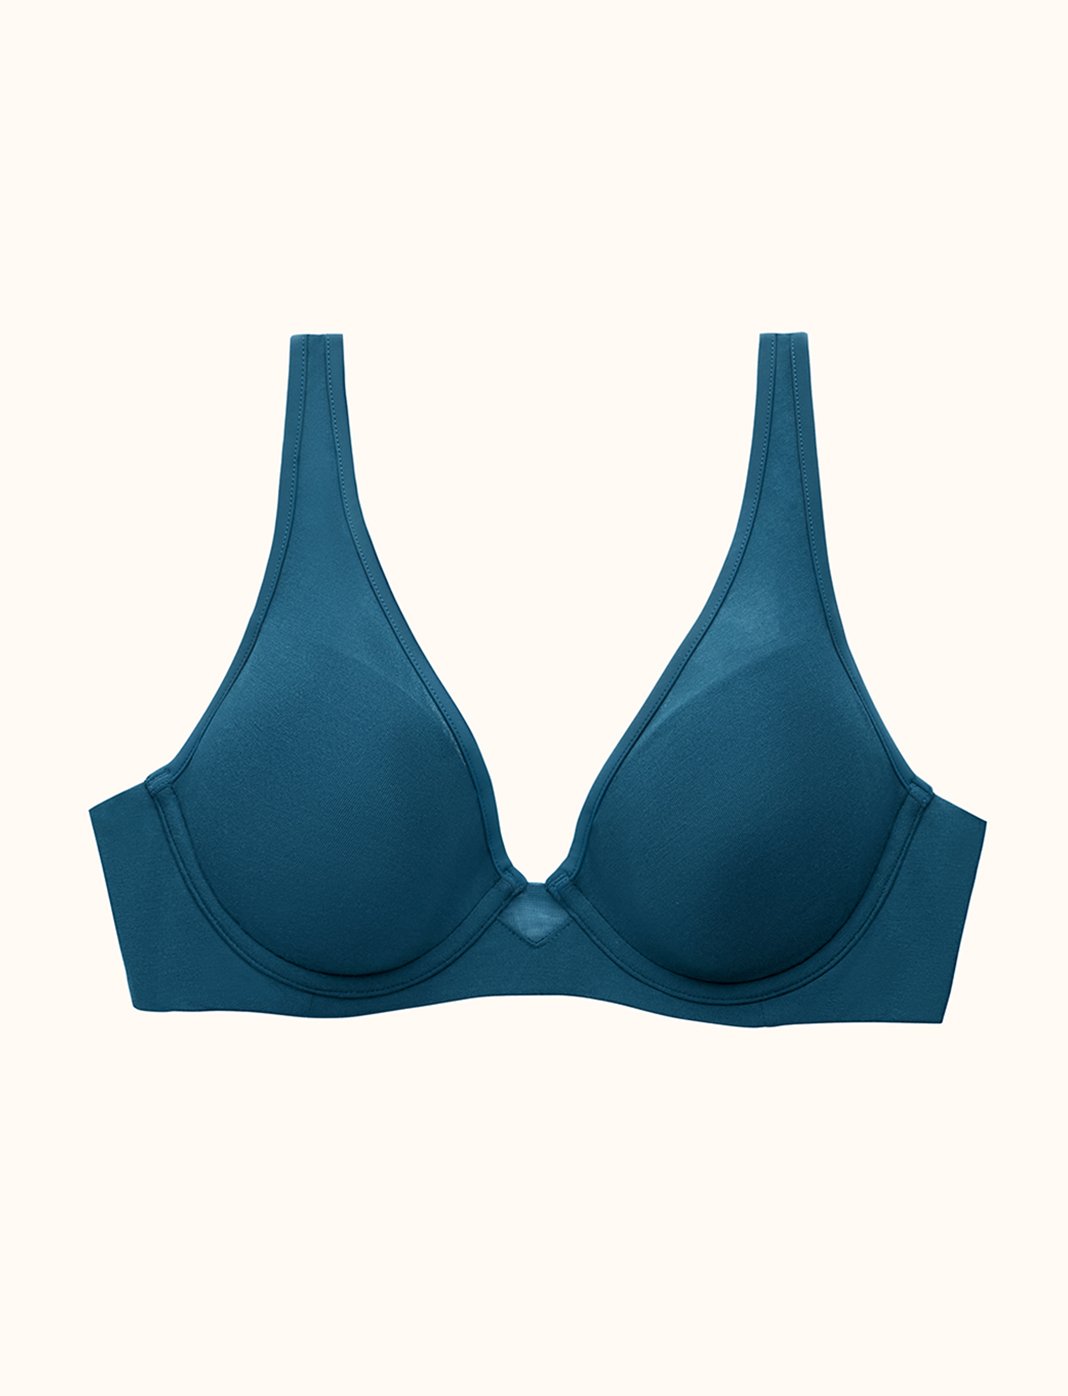 8 Breathable Bras To Keep Your Boobs Comfortable | Well+Good